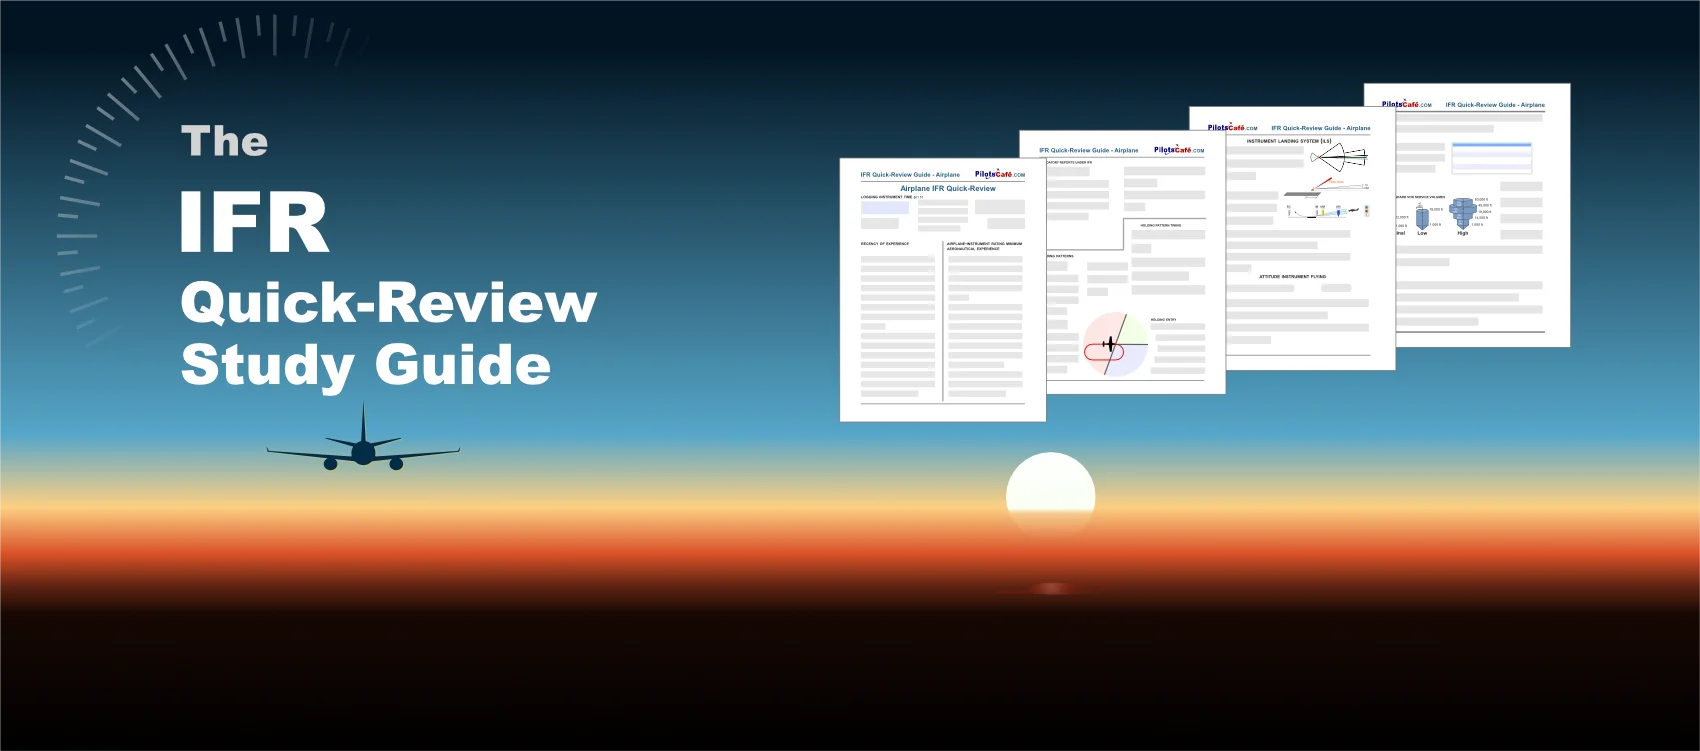 IFR Quick-Review Study Guide